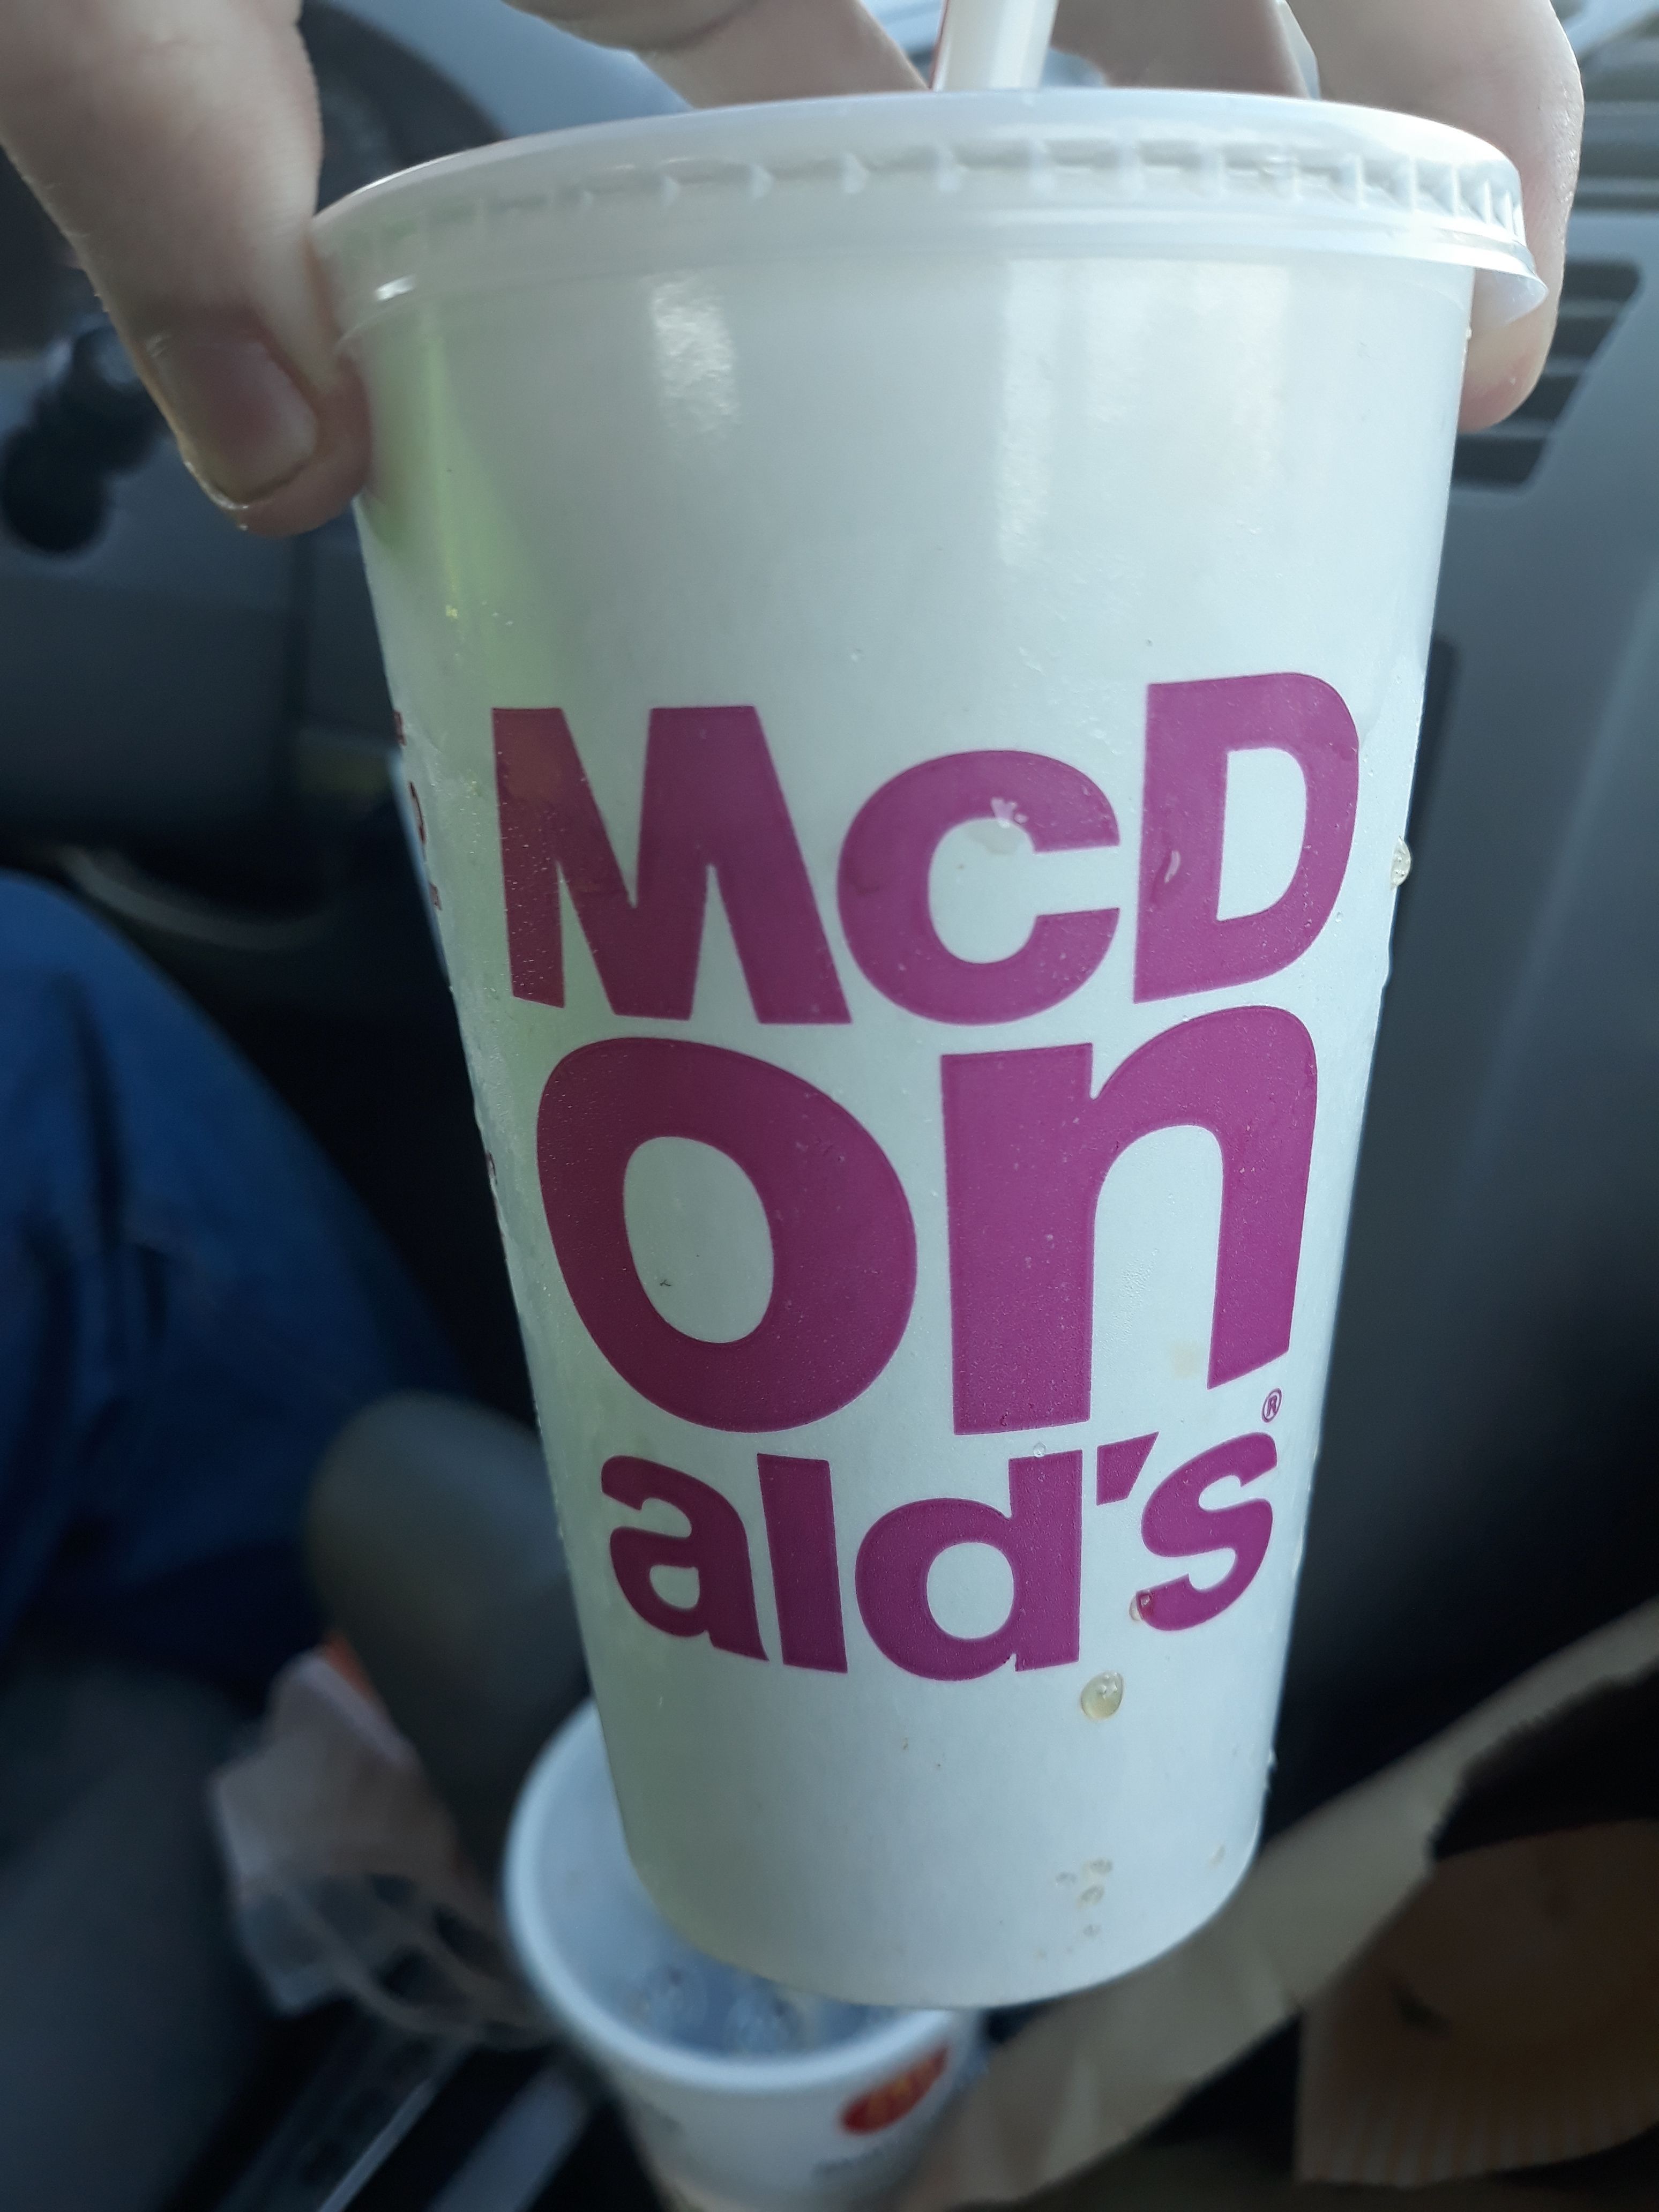 My son said " look dad, it's Mc-D, on aids!"